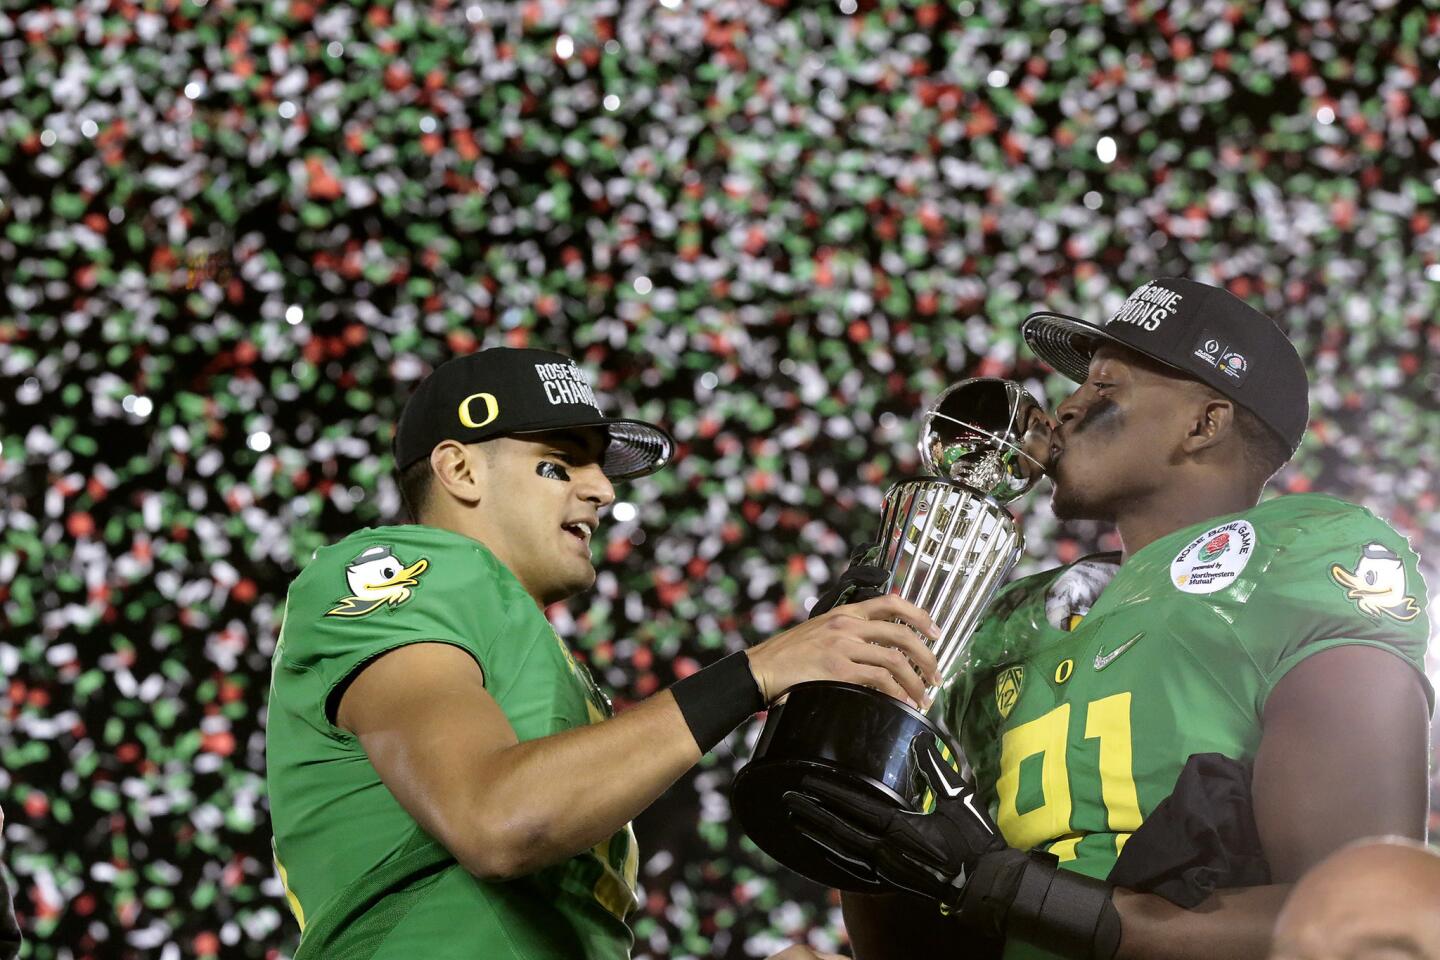 Oregon quarterback Marcus Mariota hands the Rose Bowl's Leishman Trophy to linebacker Tony Washington, who gives it a kiss, after the Ducks defeated Florida State in a College Football Playoff semifinal.